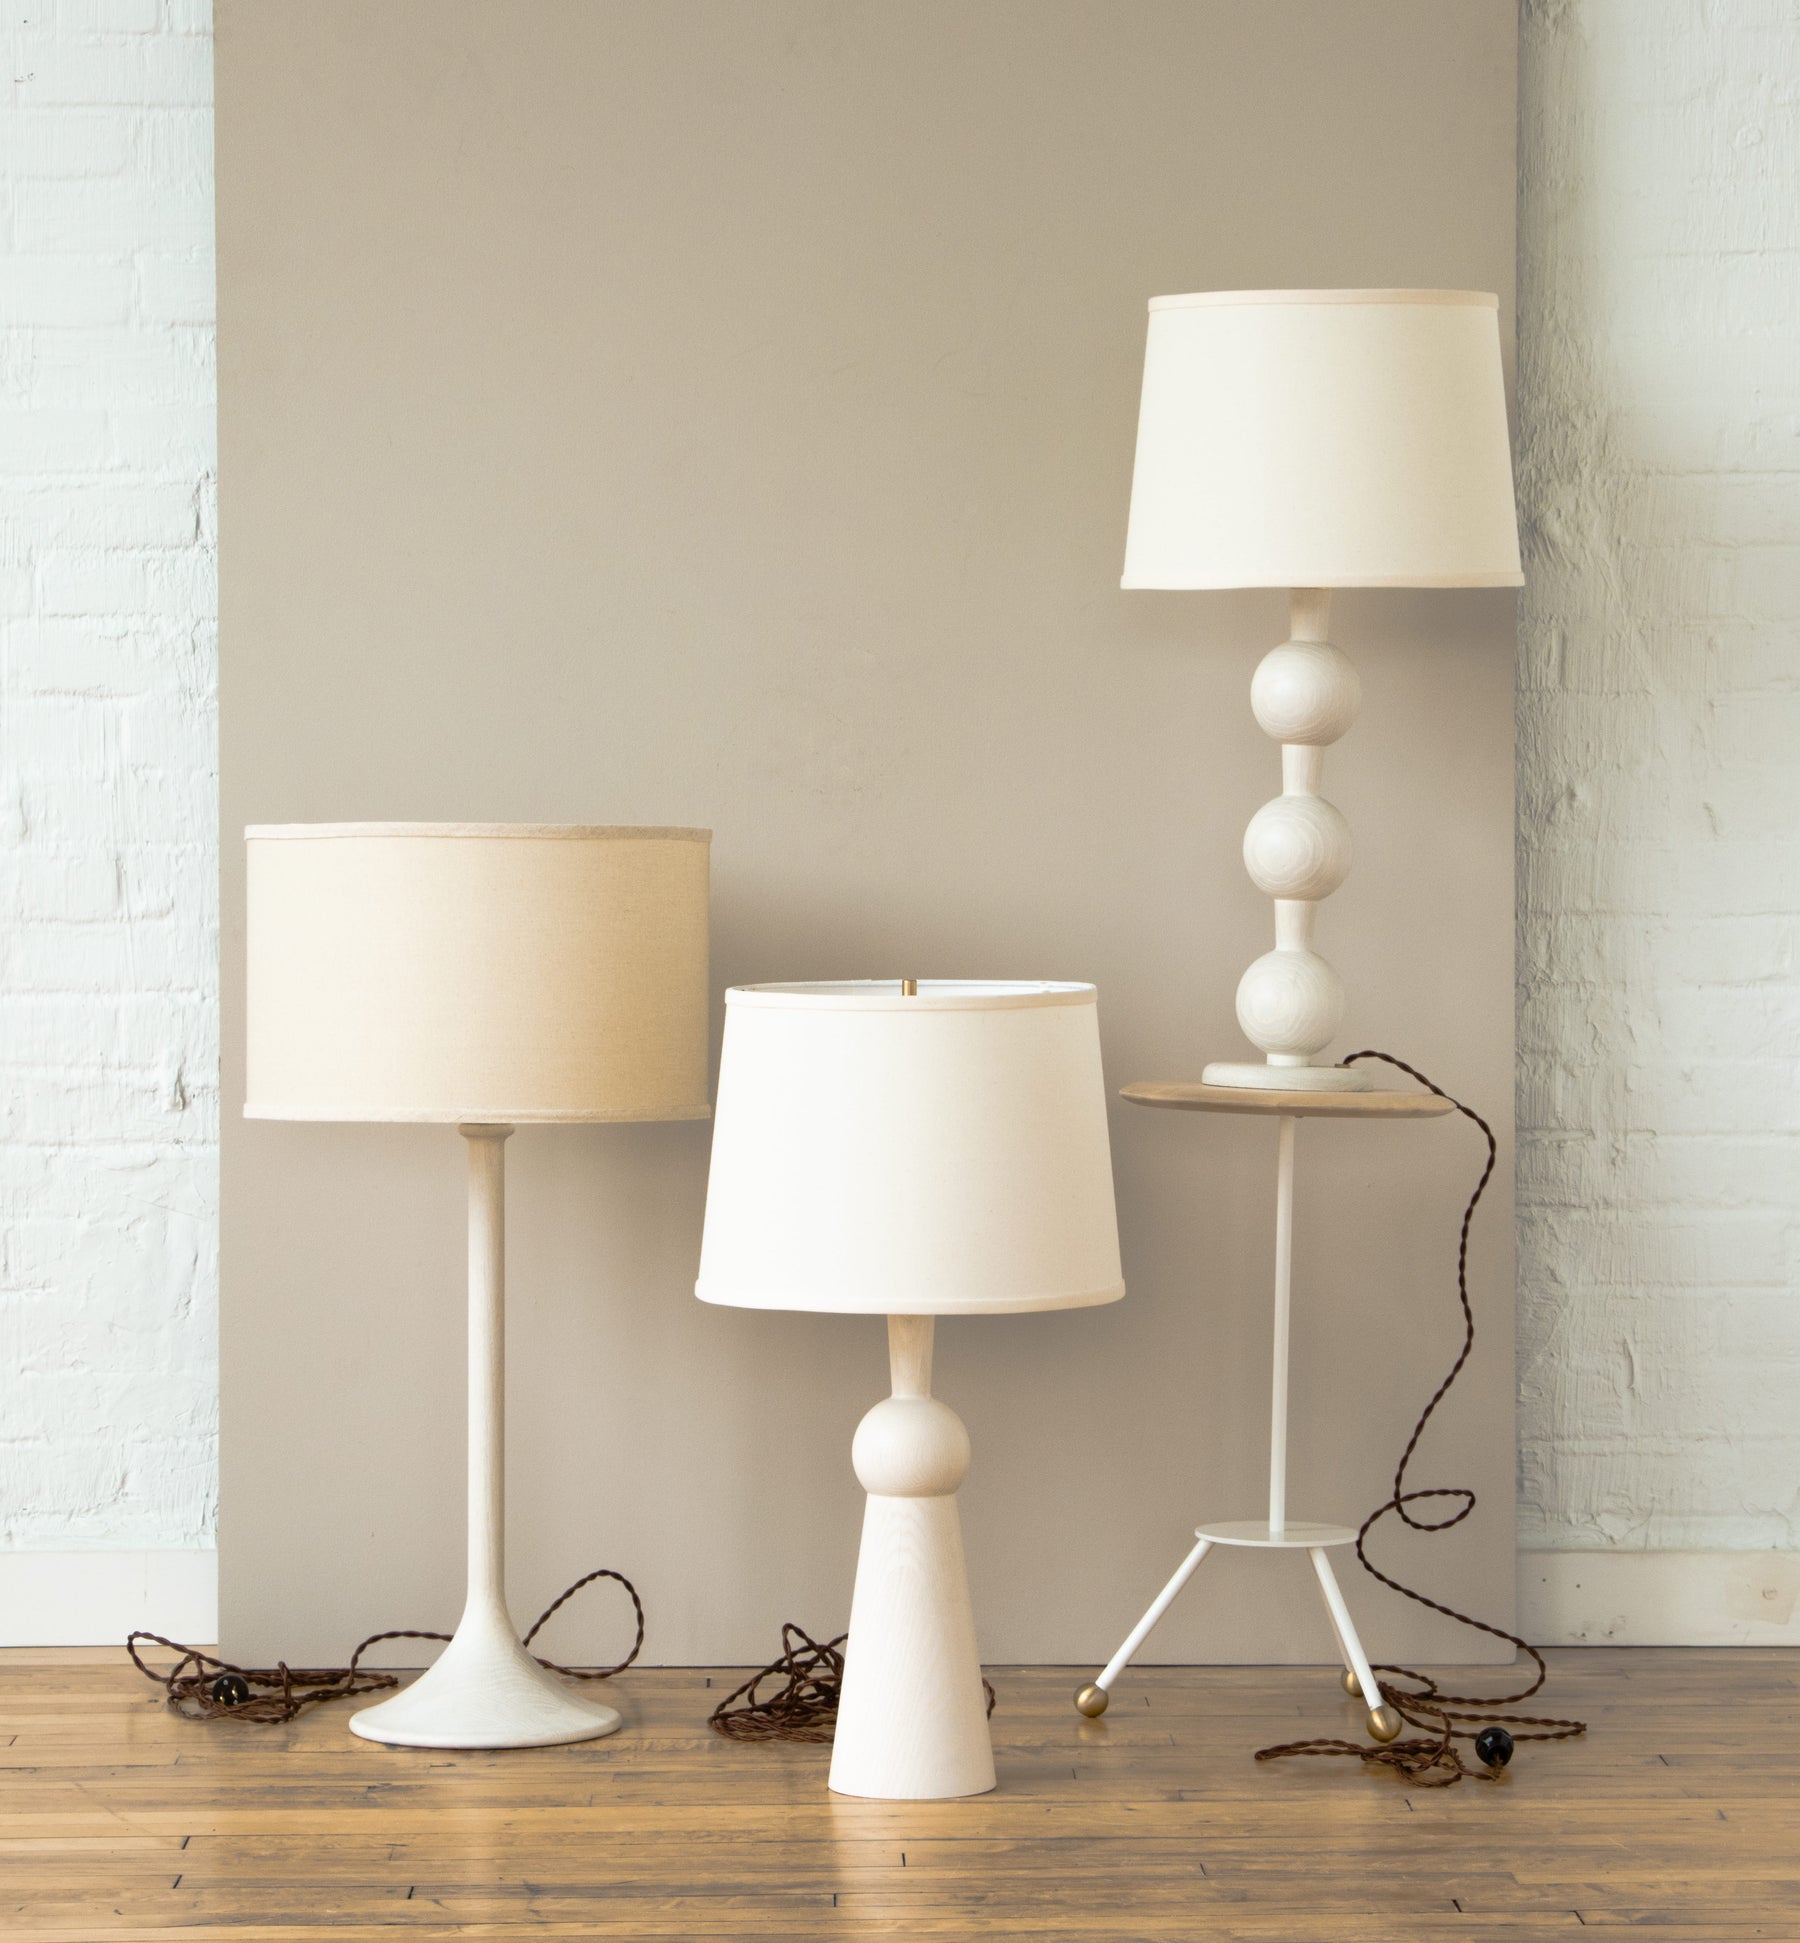 Collection of Lostine white washed wood turned lamps